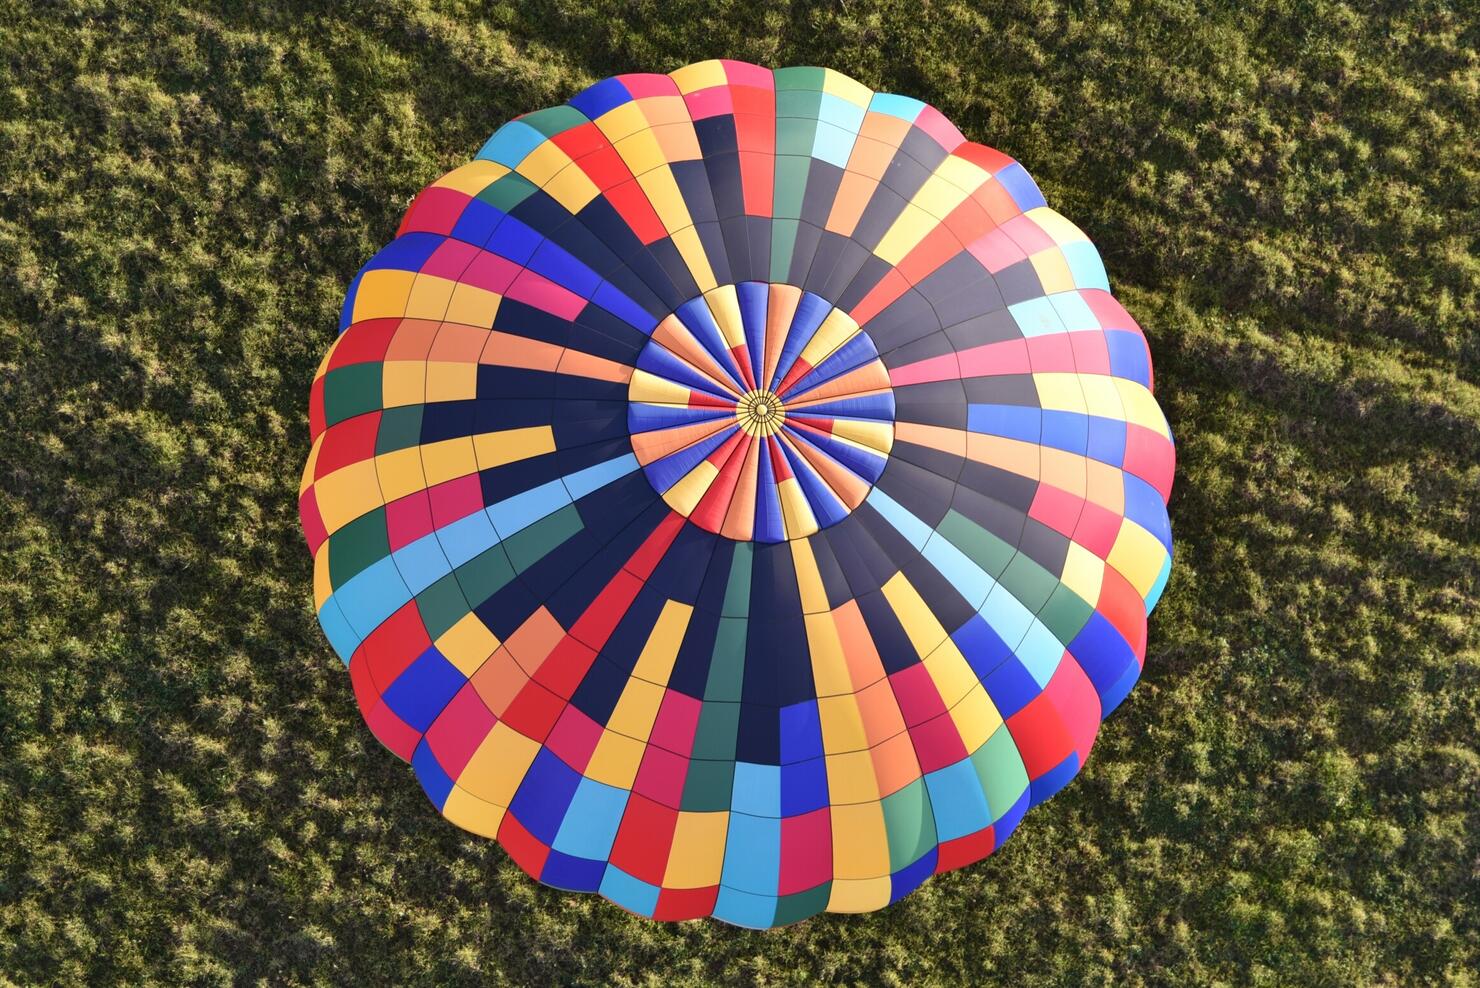 High Angle View Of Colorful Hot Air Balloon Over Landscape